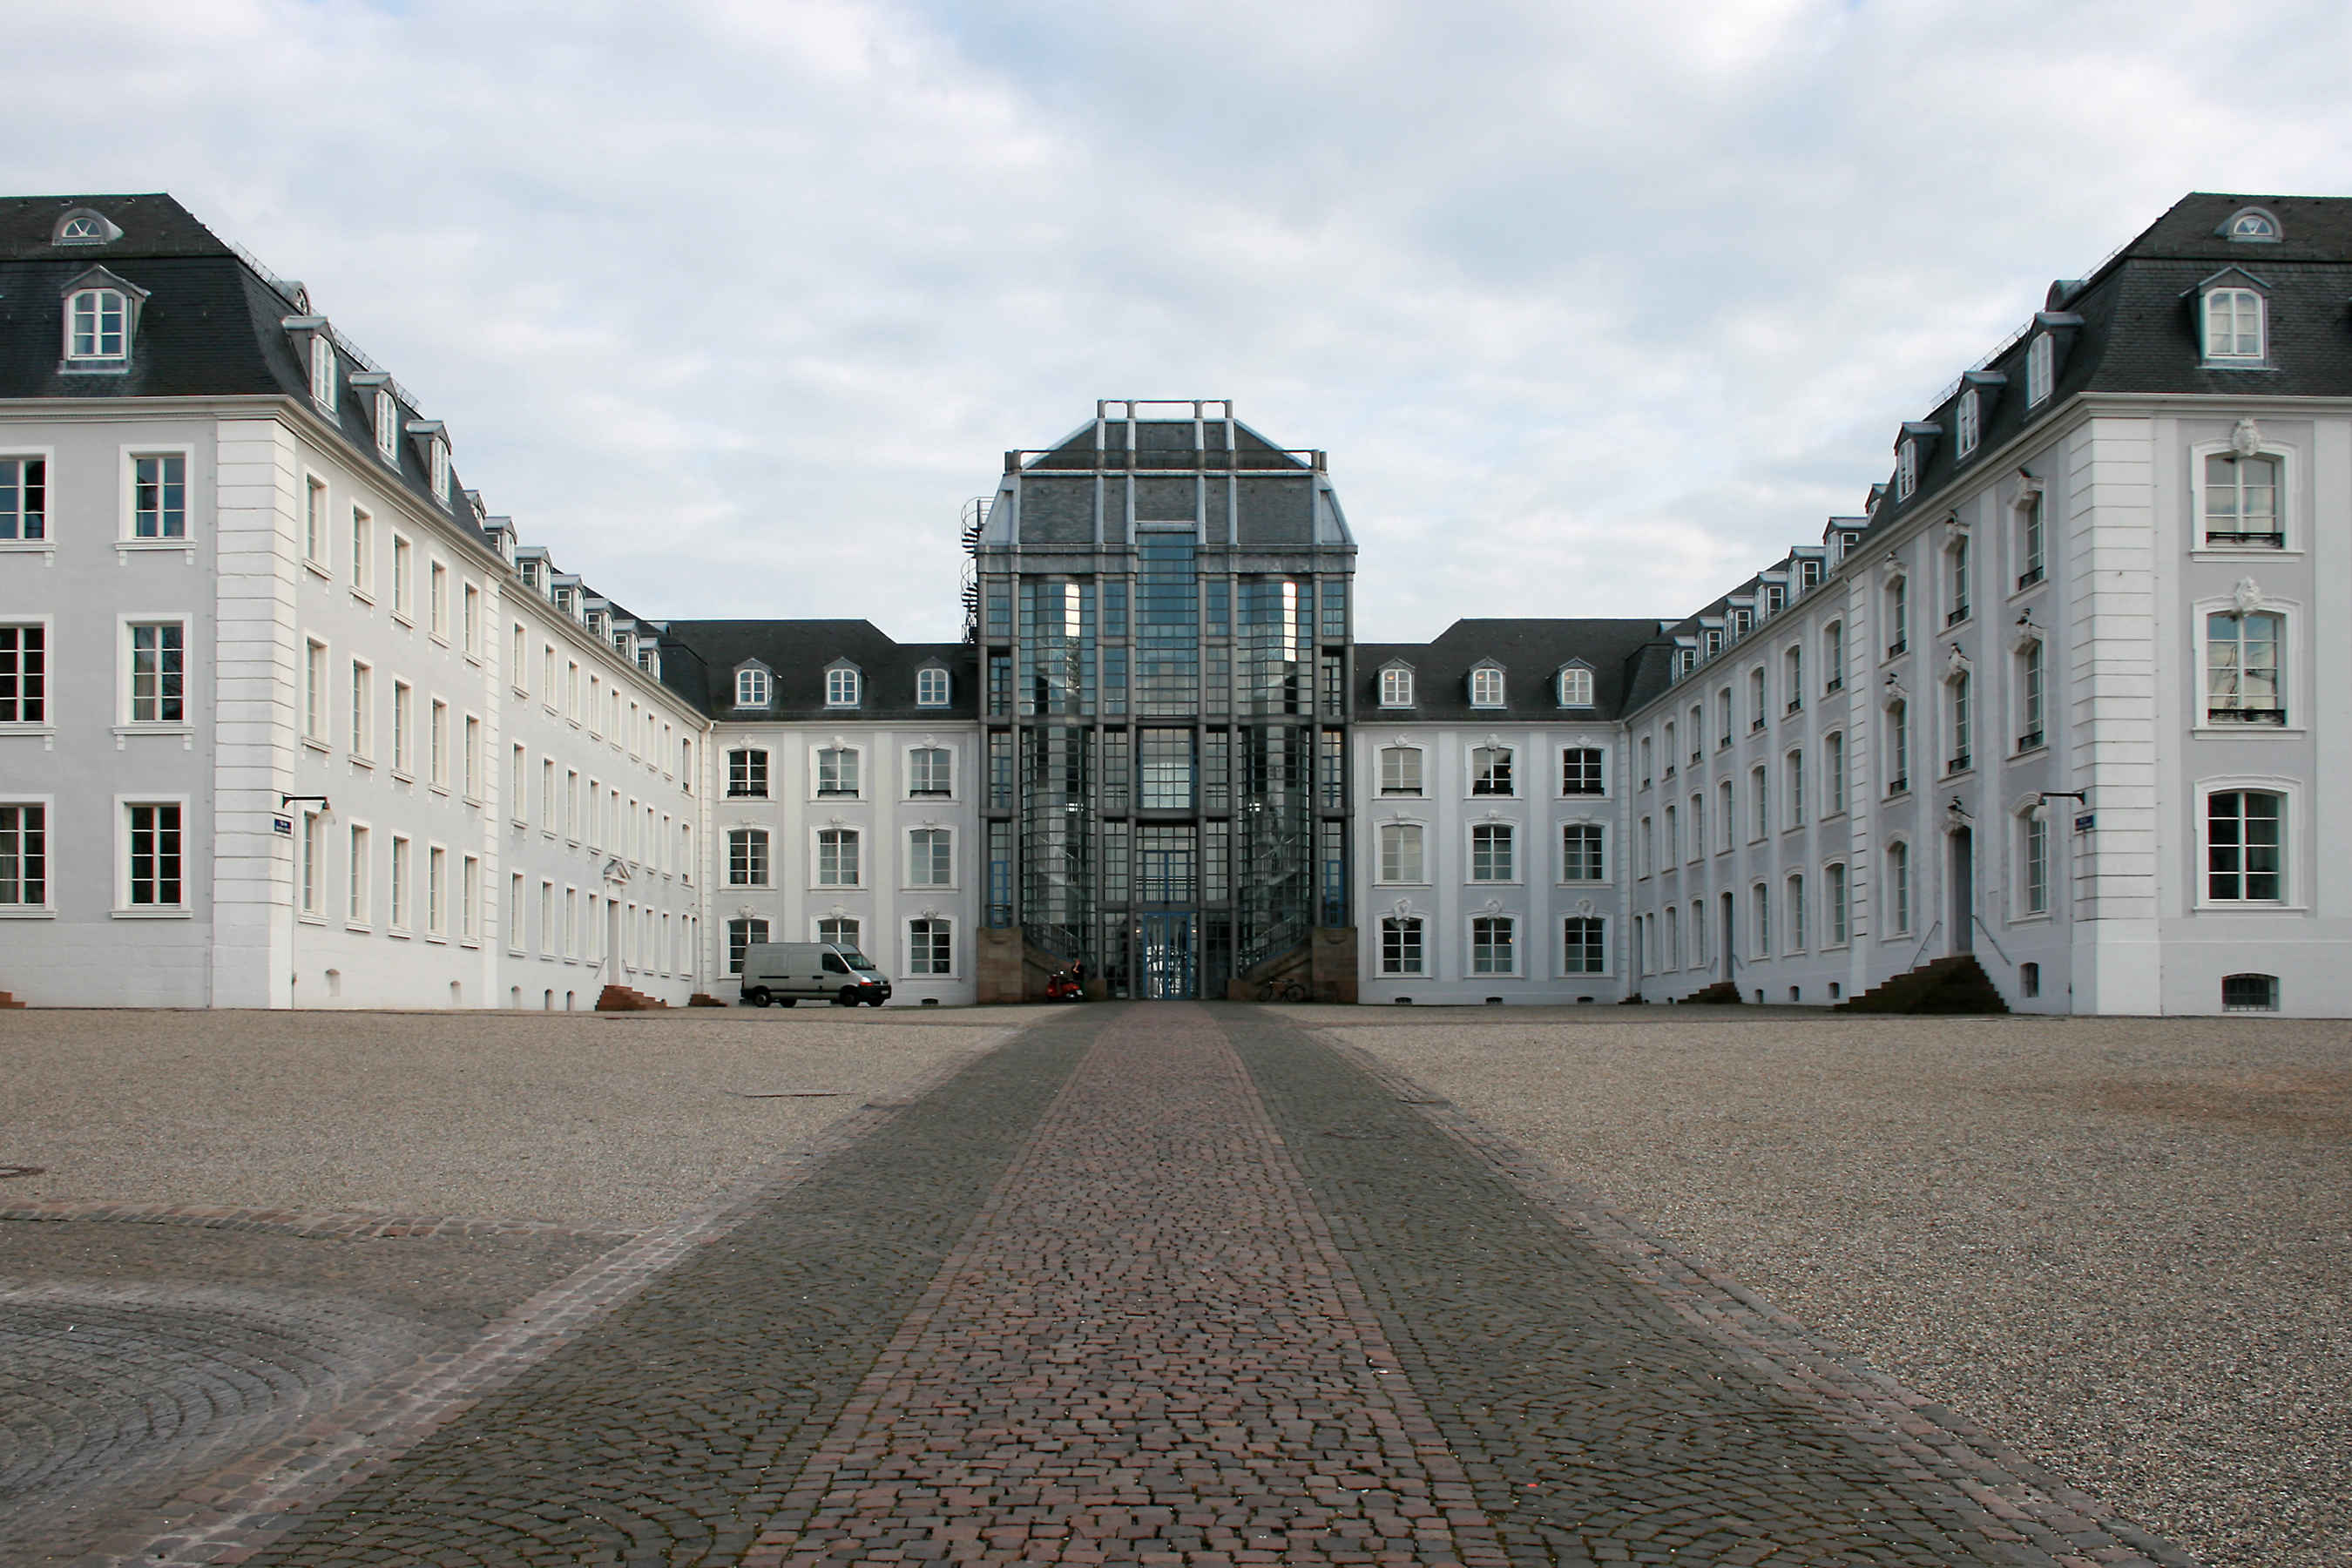 Saarbrücken Castle - Invisible Monument Square. Author: Flicka. Creative Commons Attribution-ShareAlike 3.0 Unported. Source: Wikimedia Commons